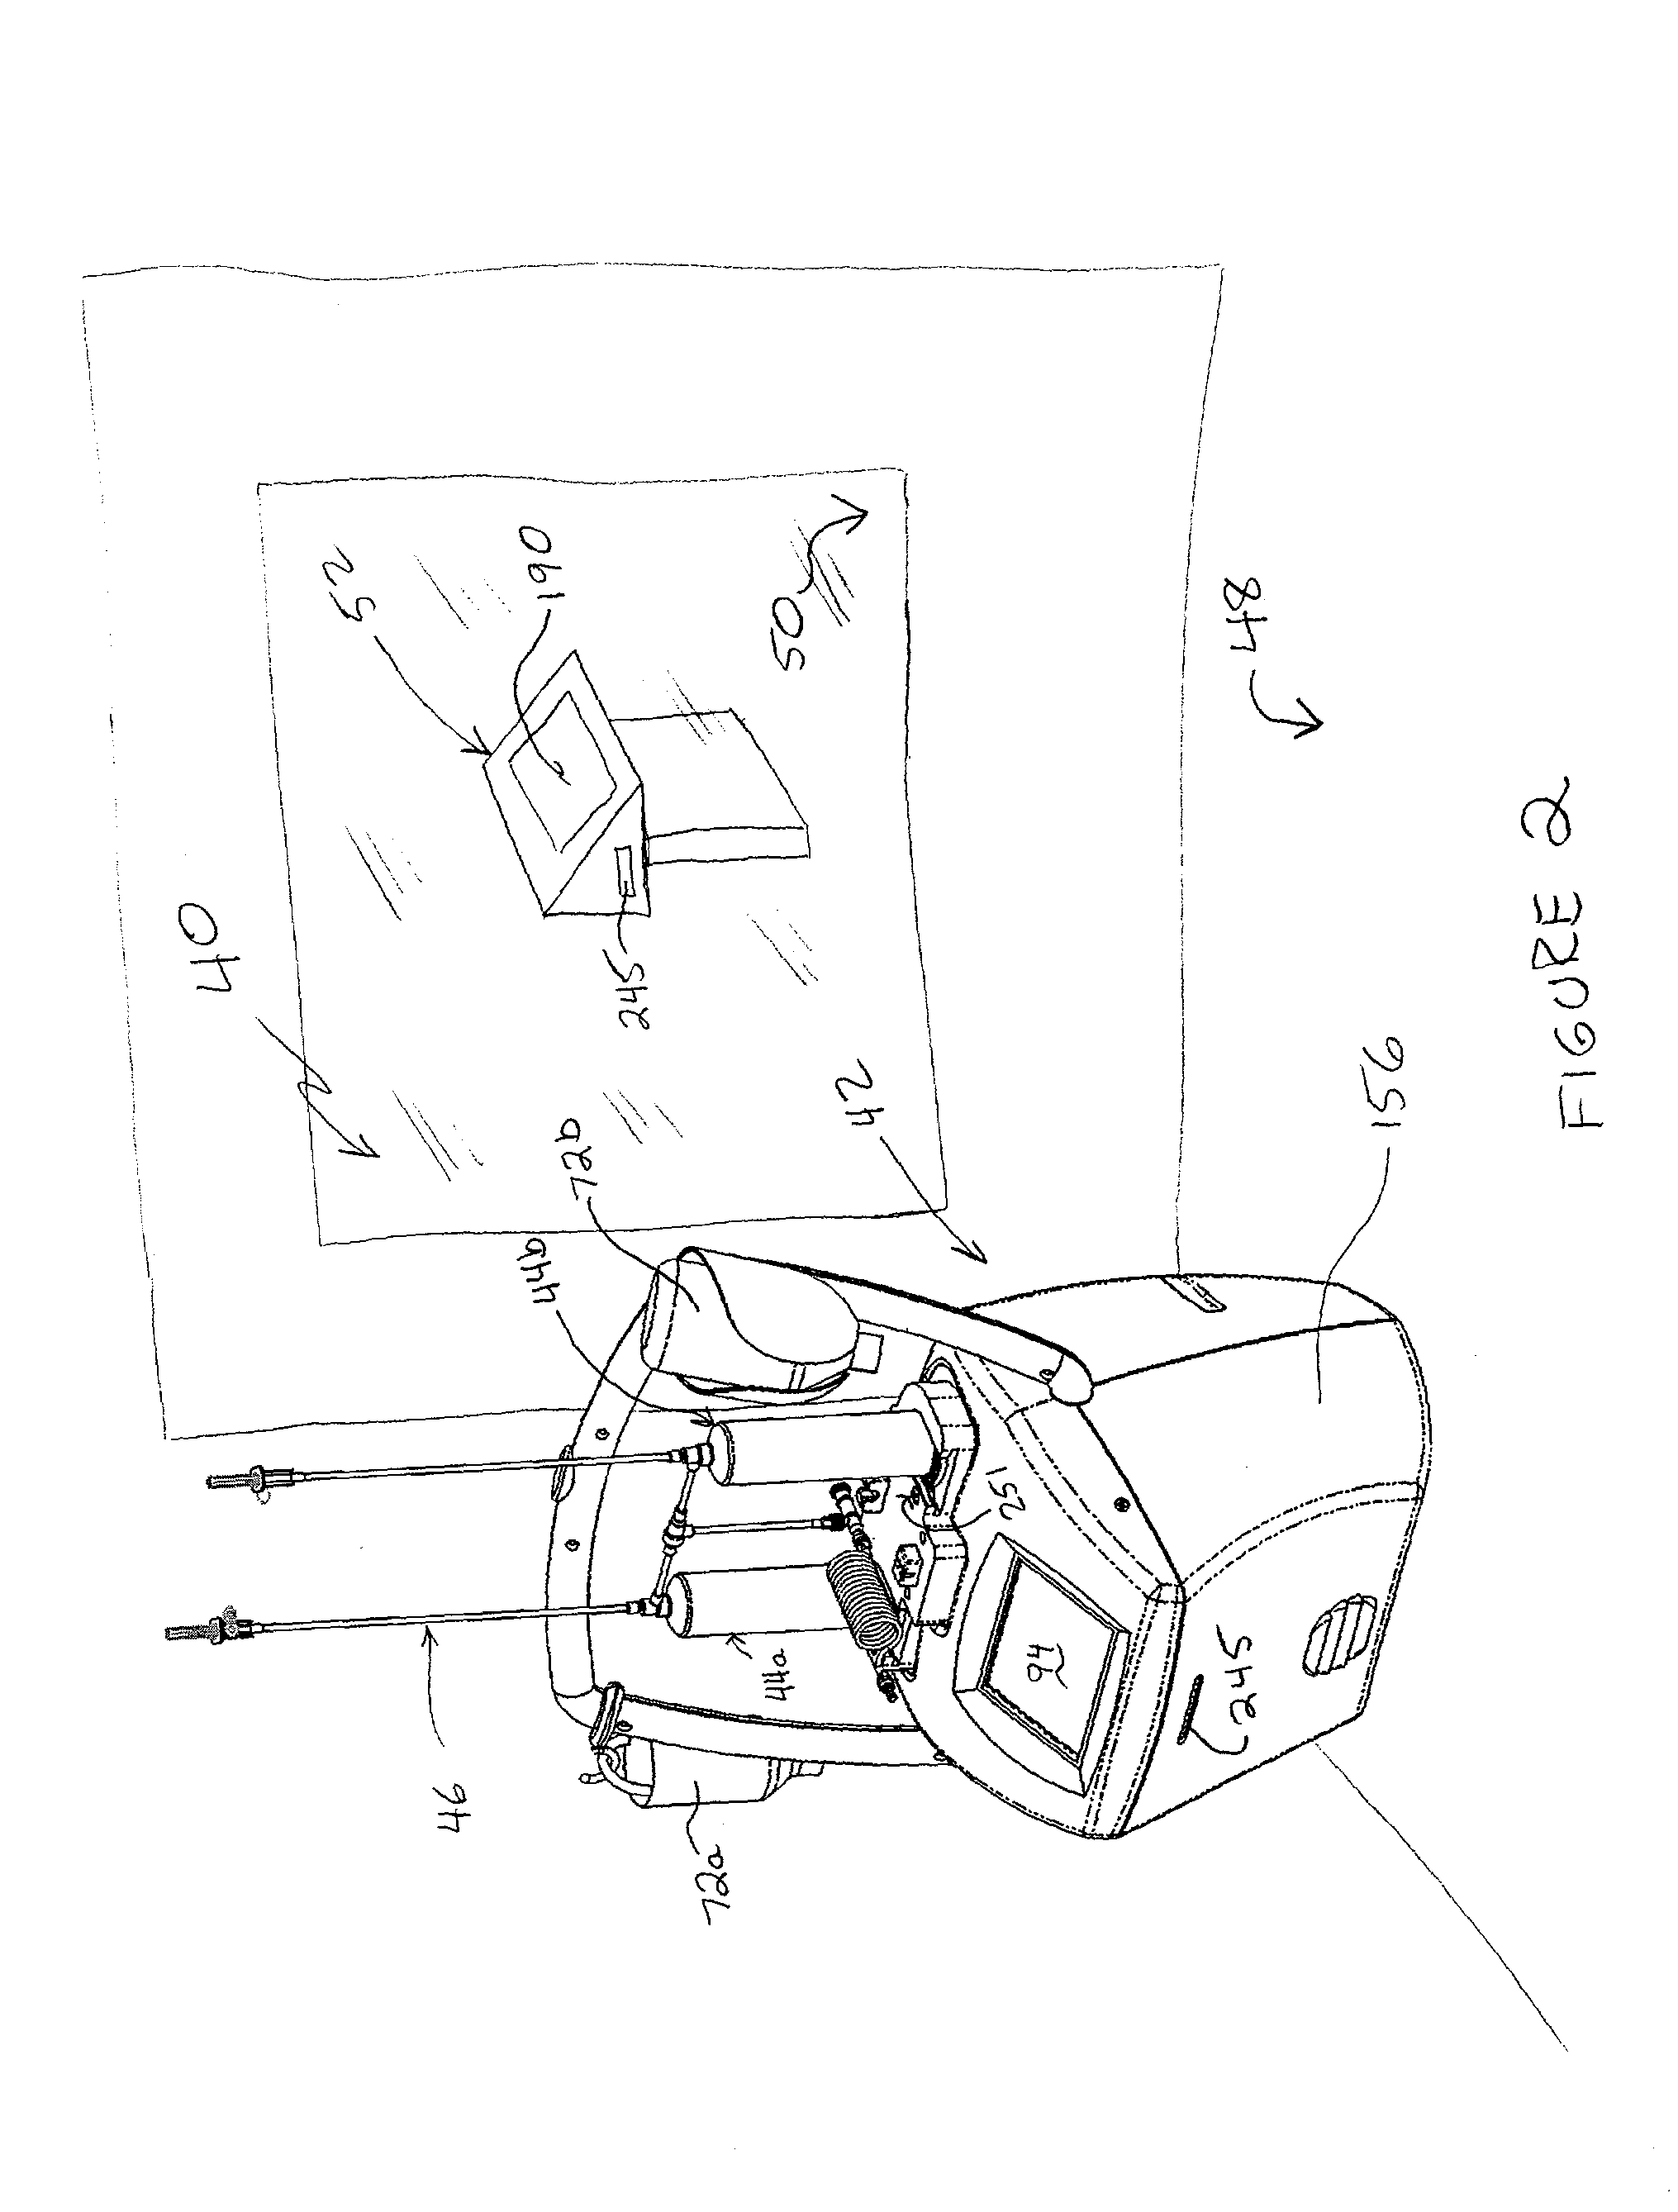 Medical injection system